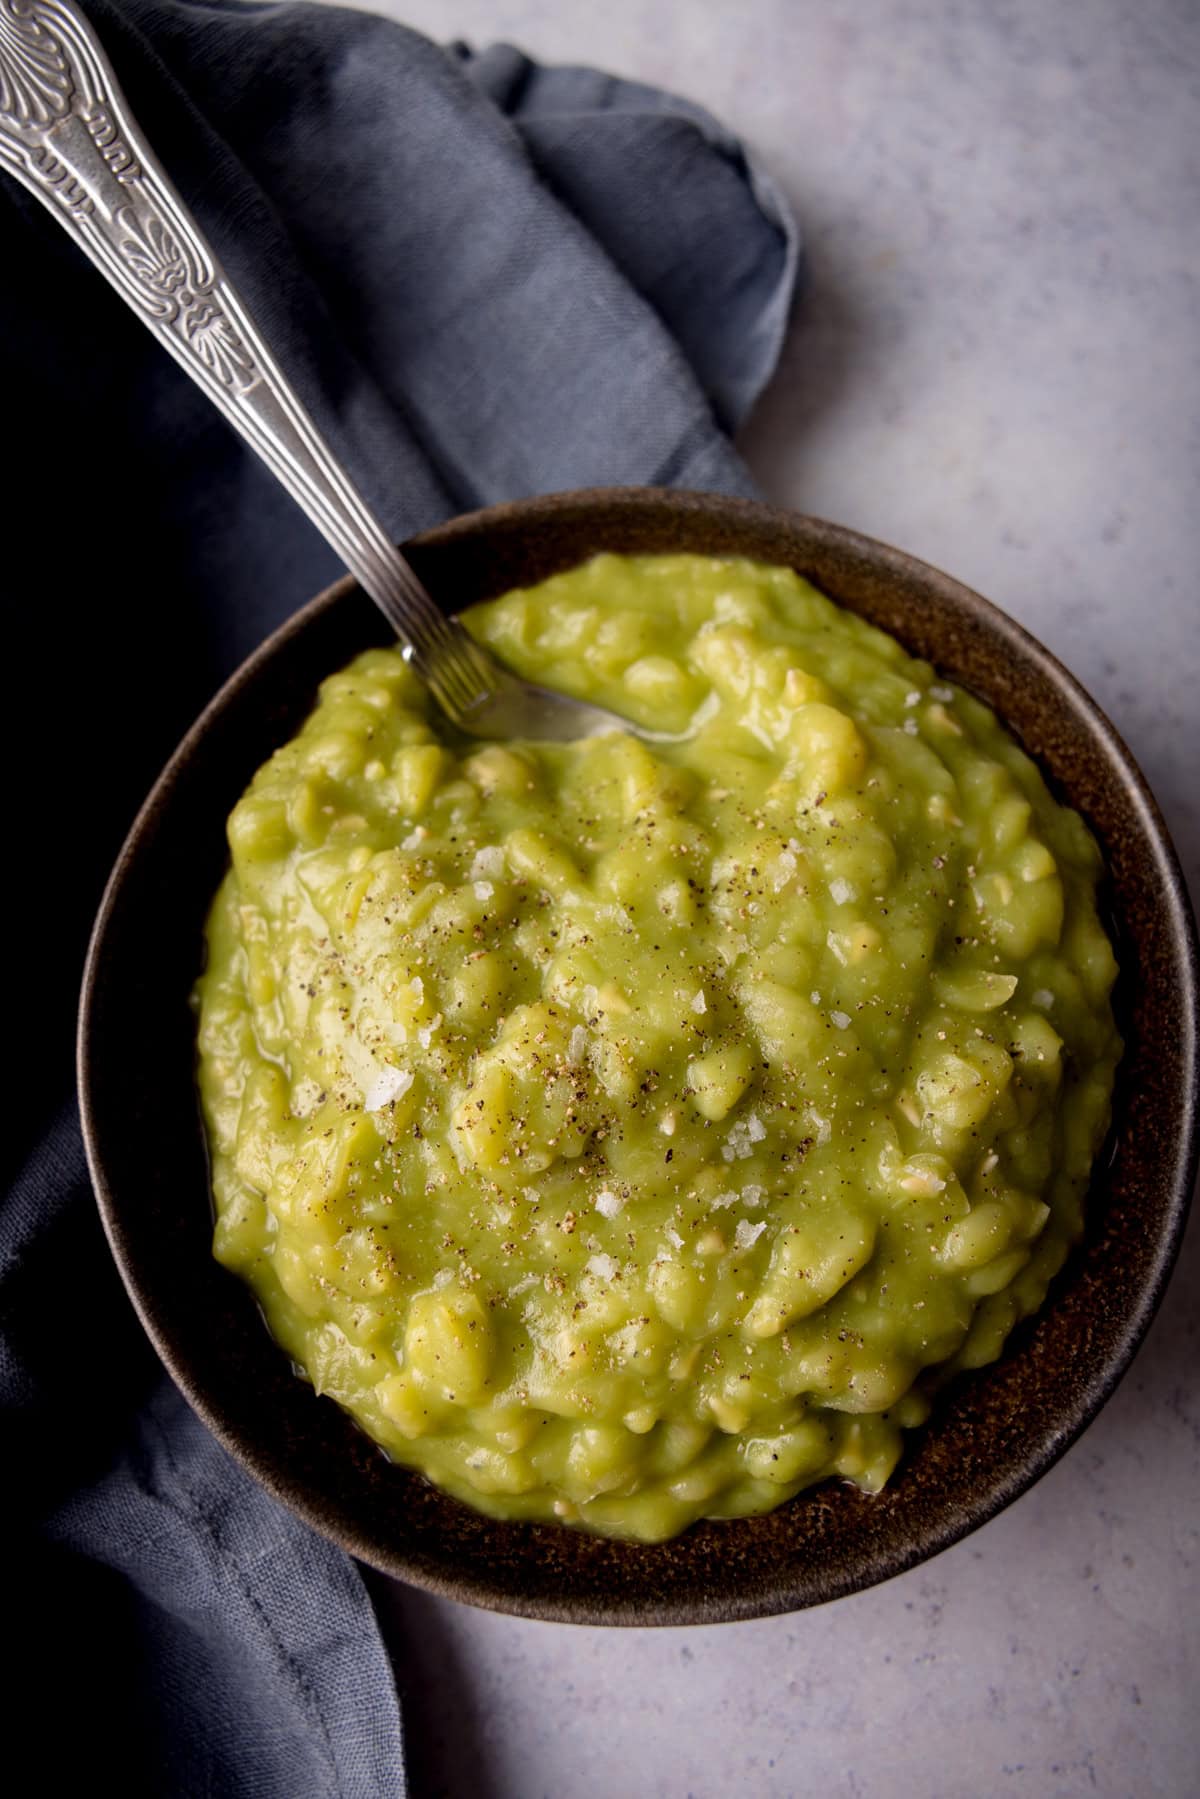 A tall, overhead shot of Chip Shop Style Mushy Peas in a black bowl. There is a silver spoon, sticking out of the left of the dish. A slate grey napkin covers the left of the background. The background is light grey.